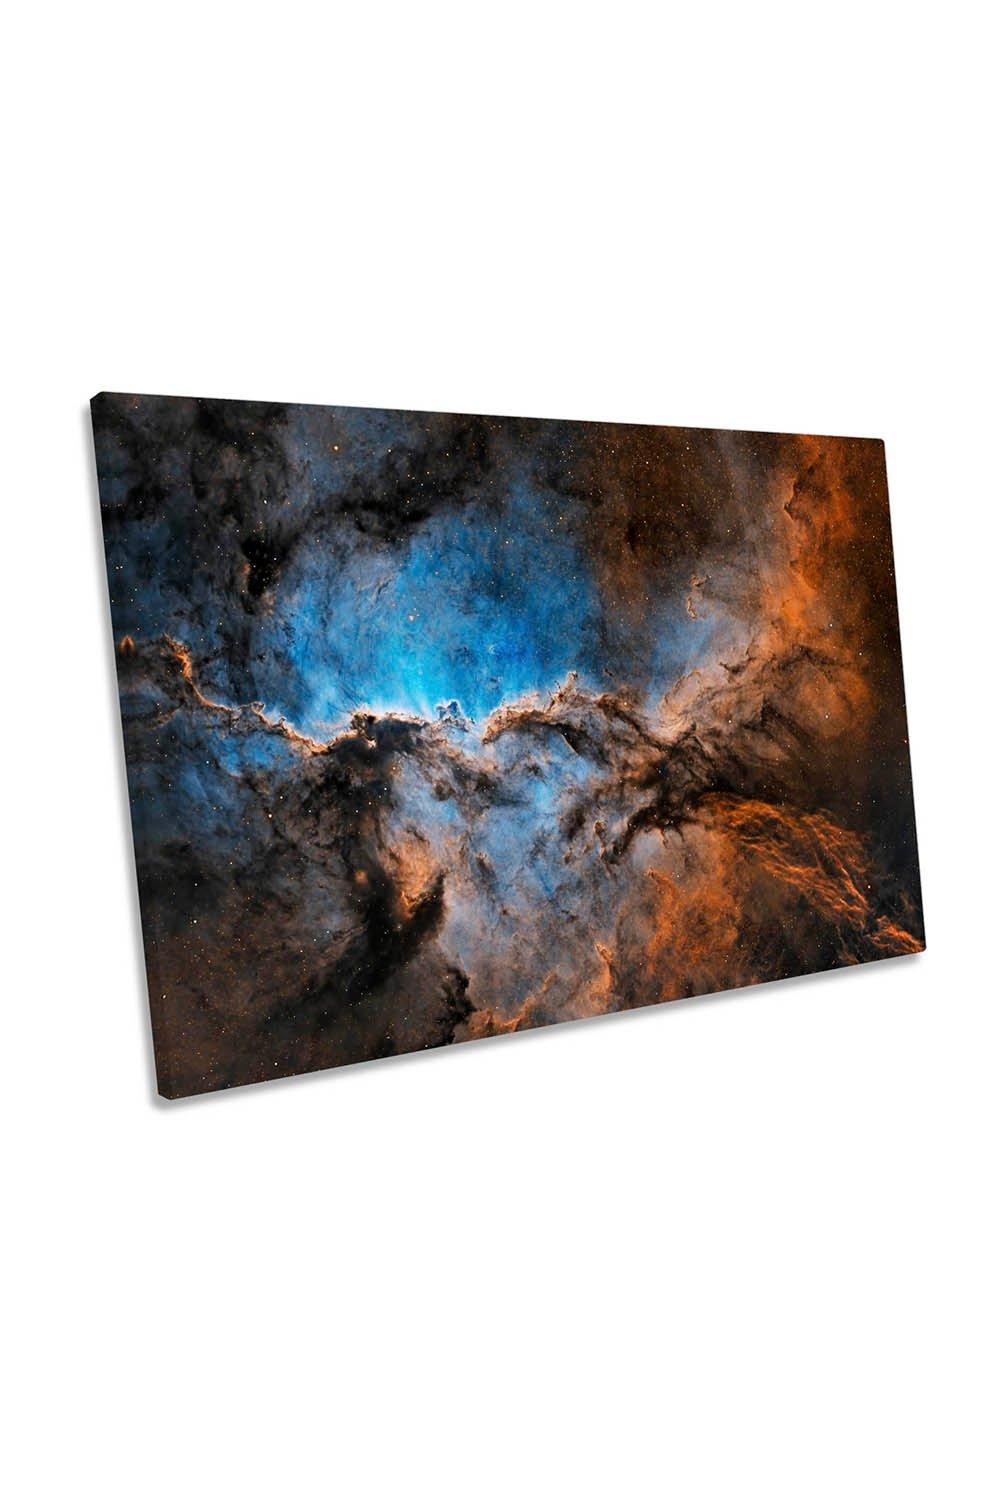 Fighting Dragons of Ara Outer Space Canvas Wall Art Picture Print